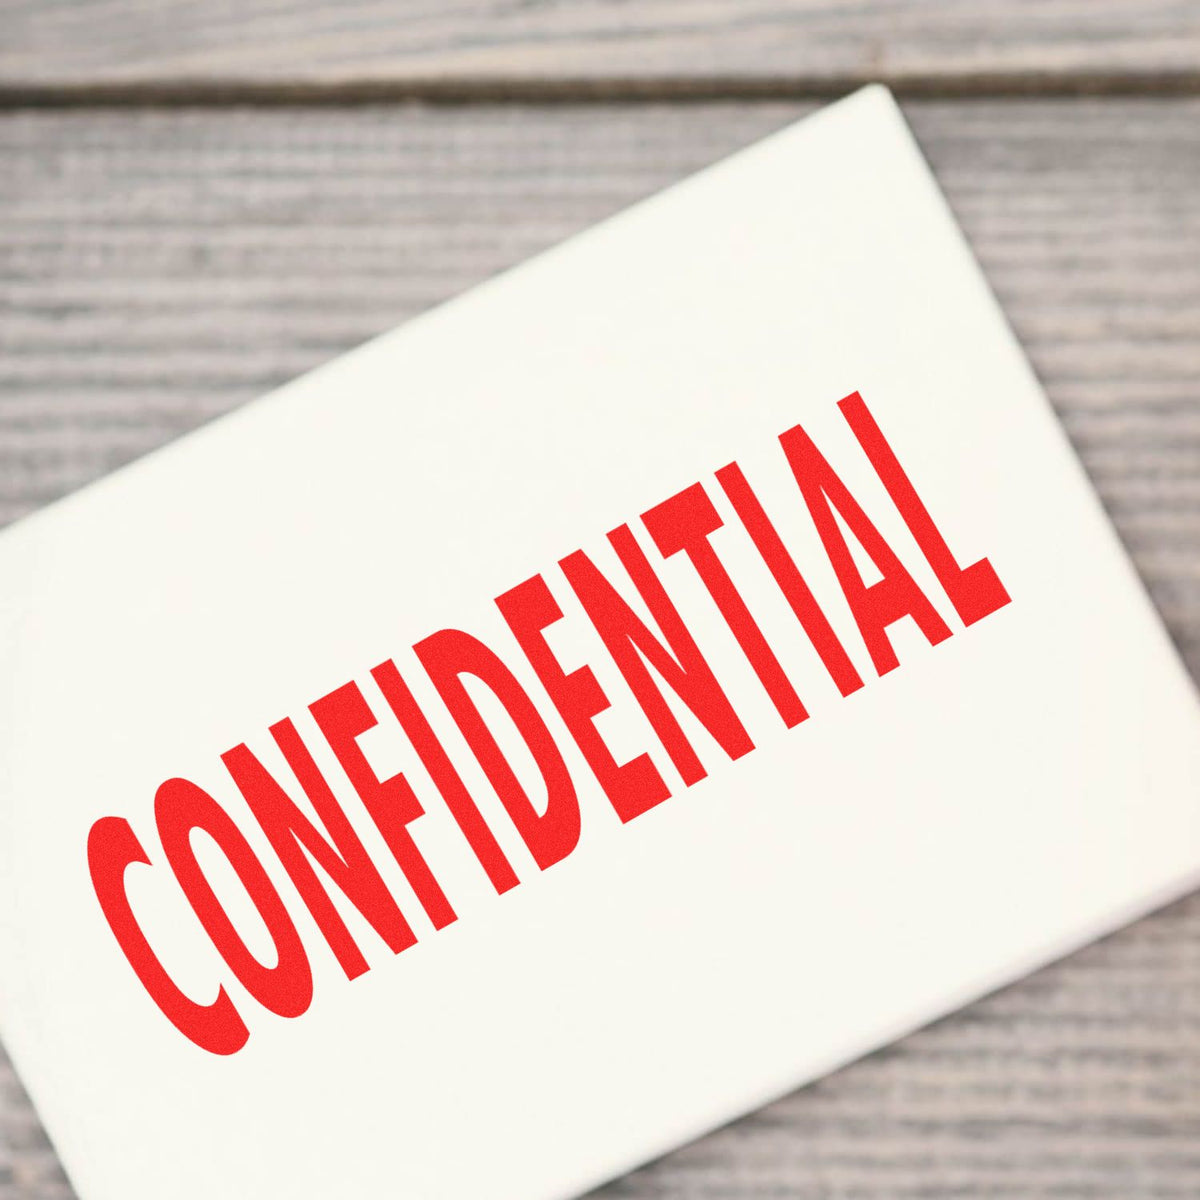 Large Confidential Rubber Stamp In Use Photo